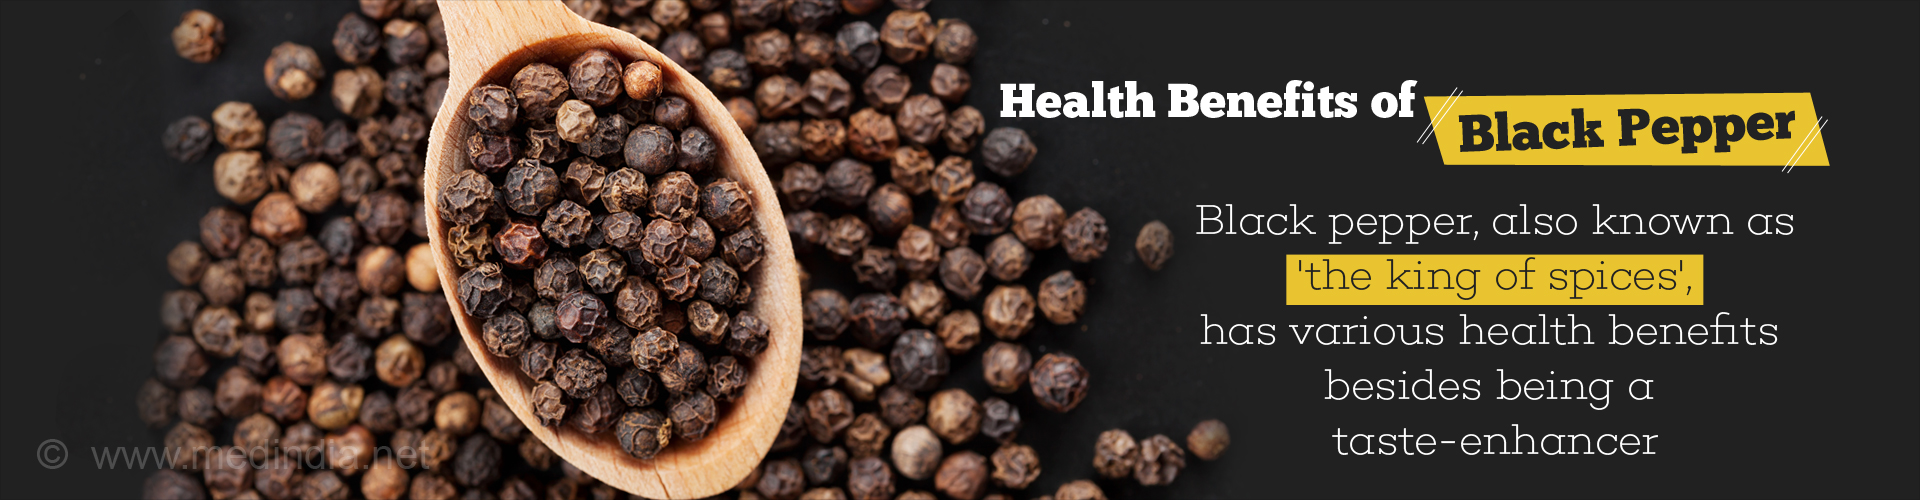 Health benefits of black pepper - Black pepper, also known as 'the king of spices' has various health benefits besides being a taste-enhancer